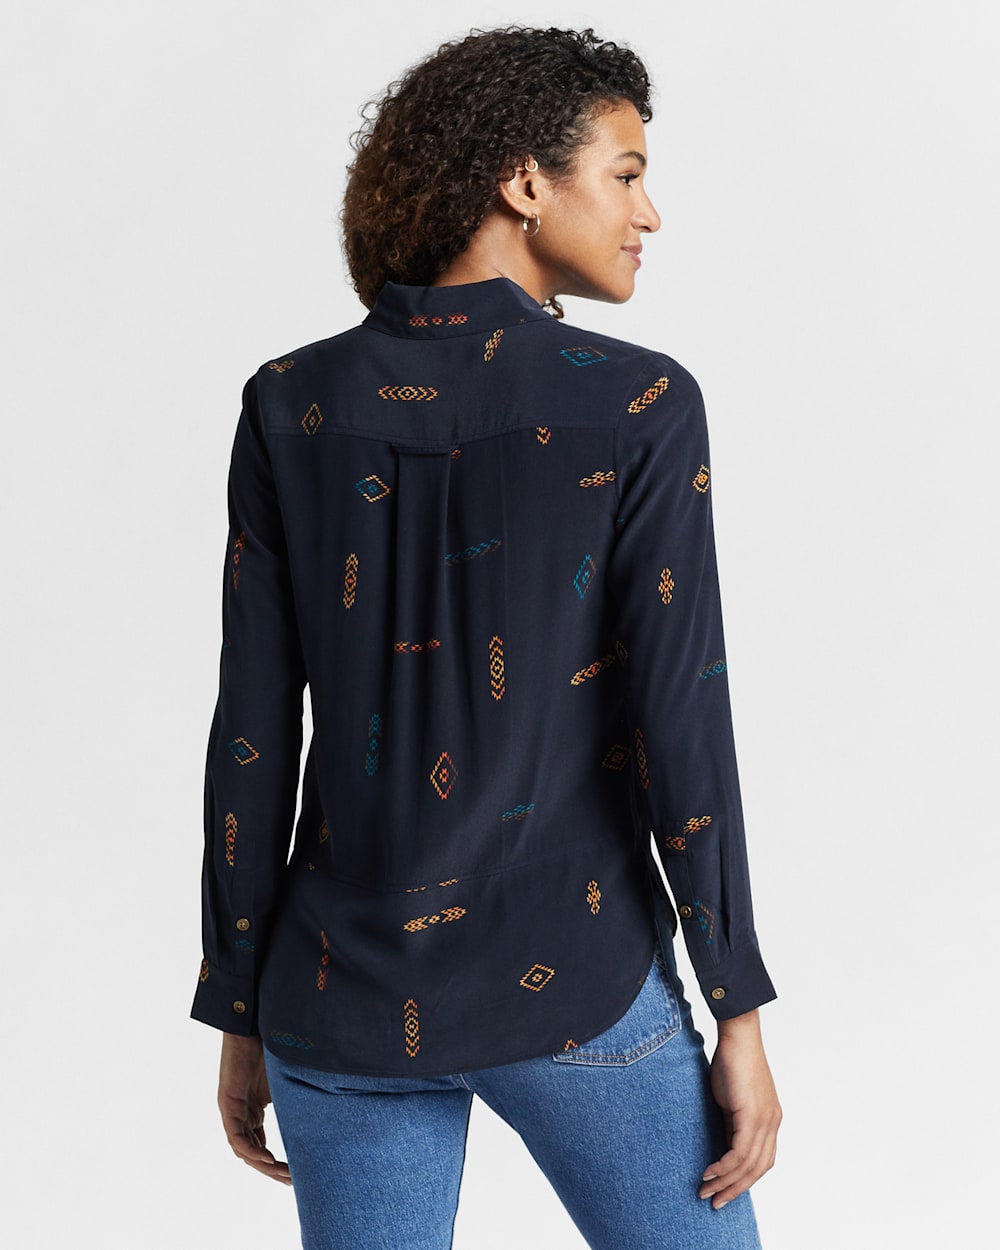 ALTERNATE VIEW OF WOMEN'S WASHABLE TWO POCKET SILK SHIRT IN MIDNIGHT NAVY MULTI image number 2